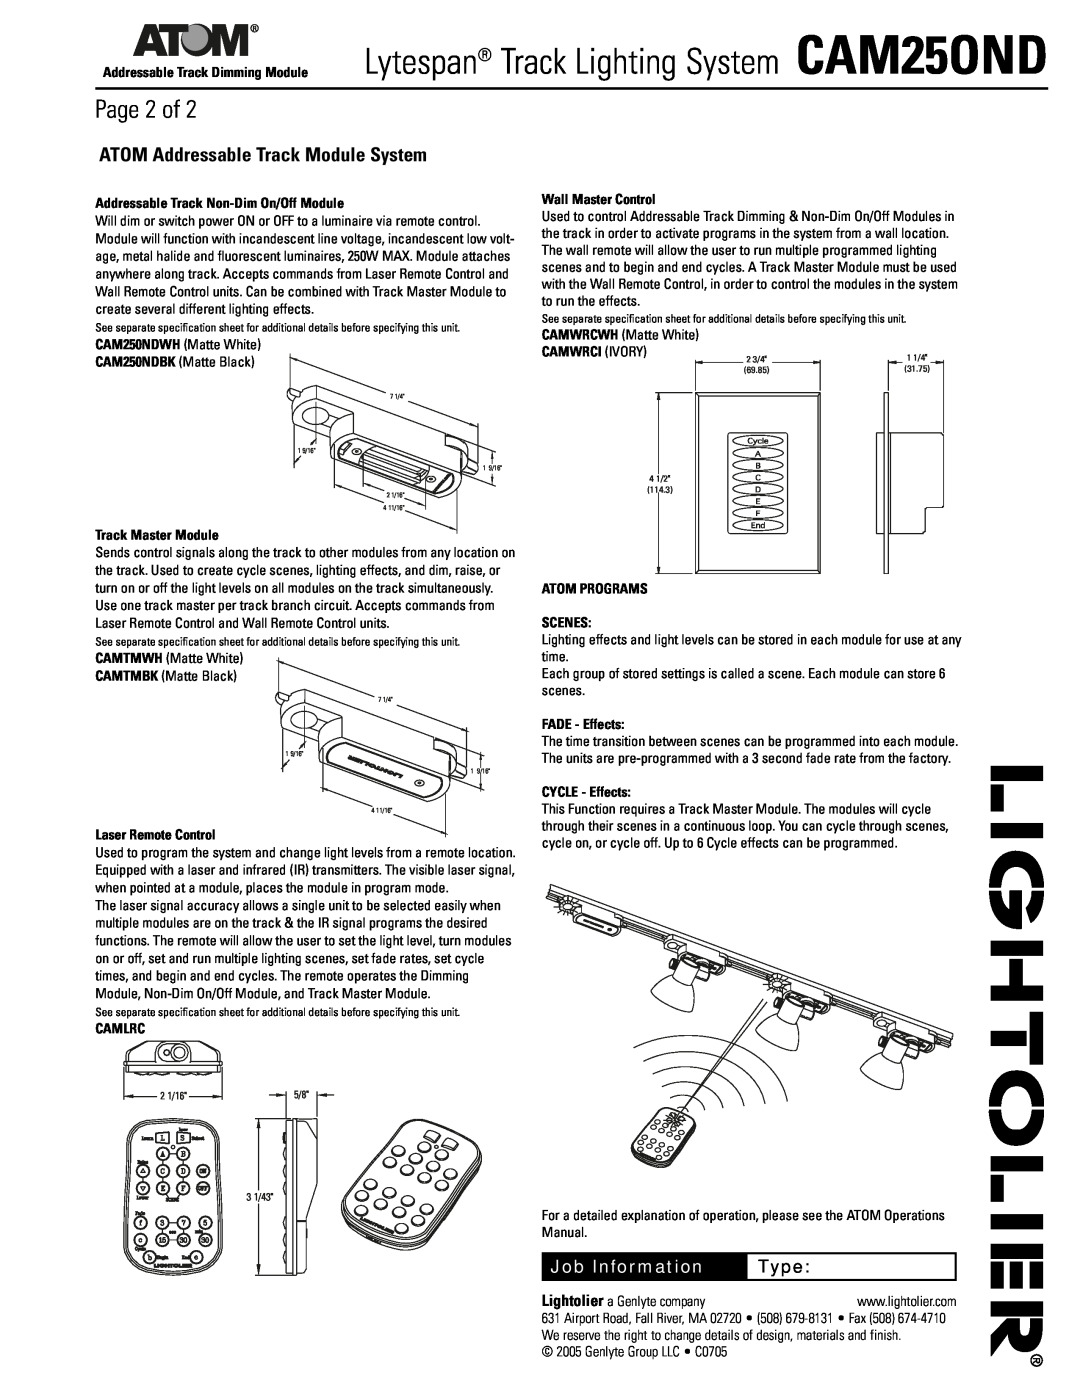 Lightolier CAM250ND dimensions Page 2 of, ATOM Addressable Track Module System, Job Information, Type, CAMWRCWH Matte White 